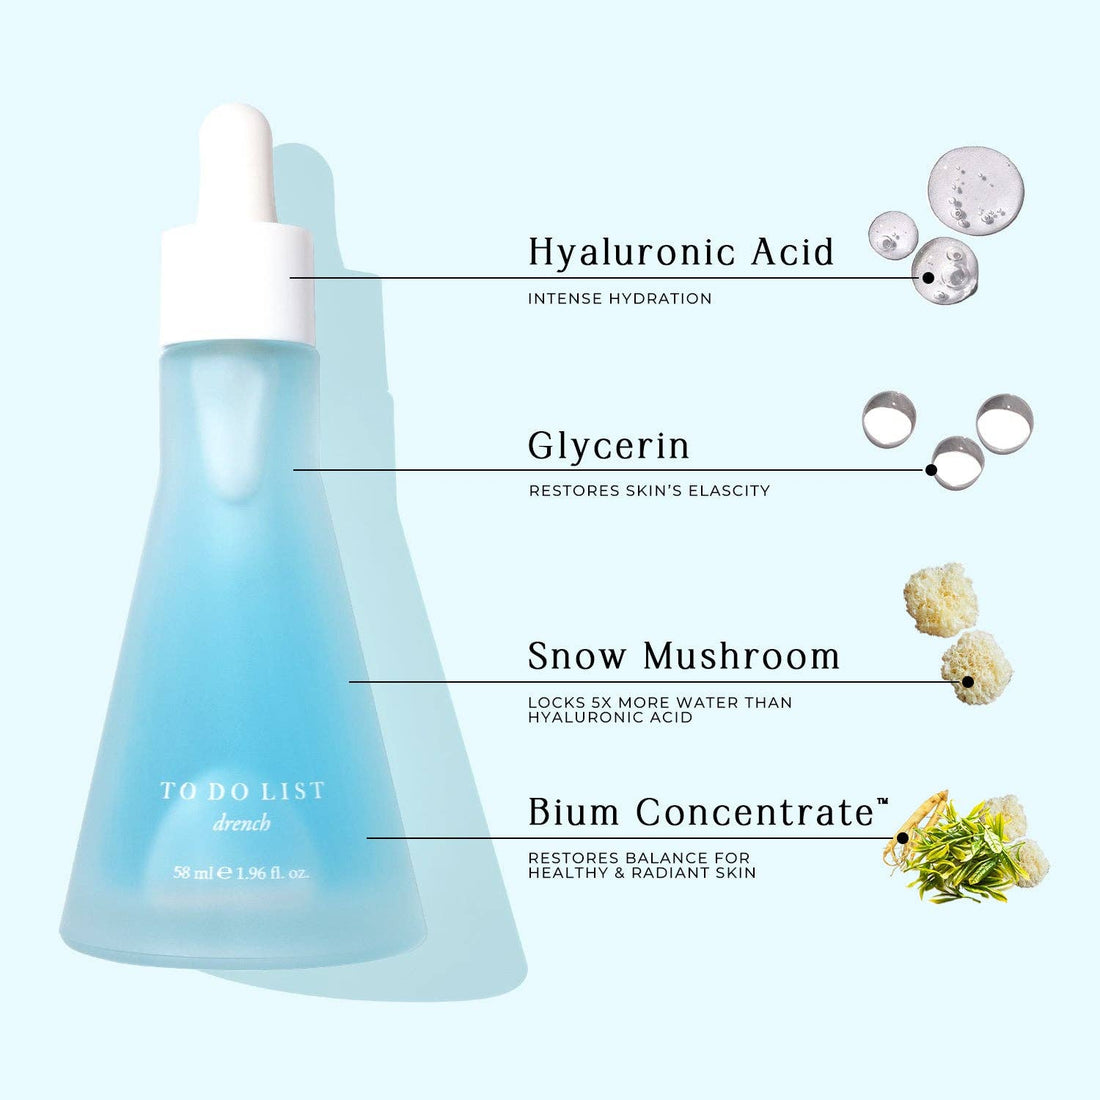 TO DO LIST  Drench - Hyaluronic Acid Serum